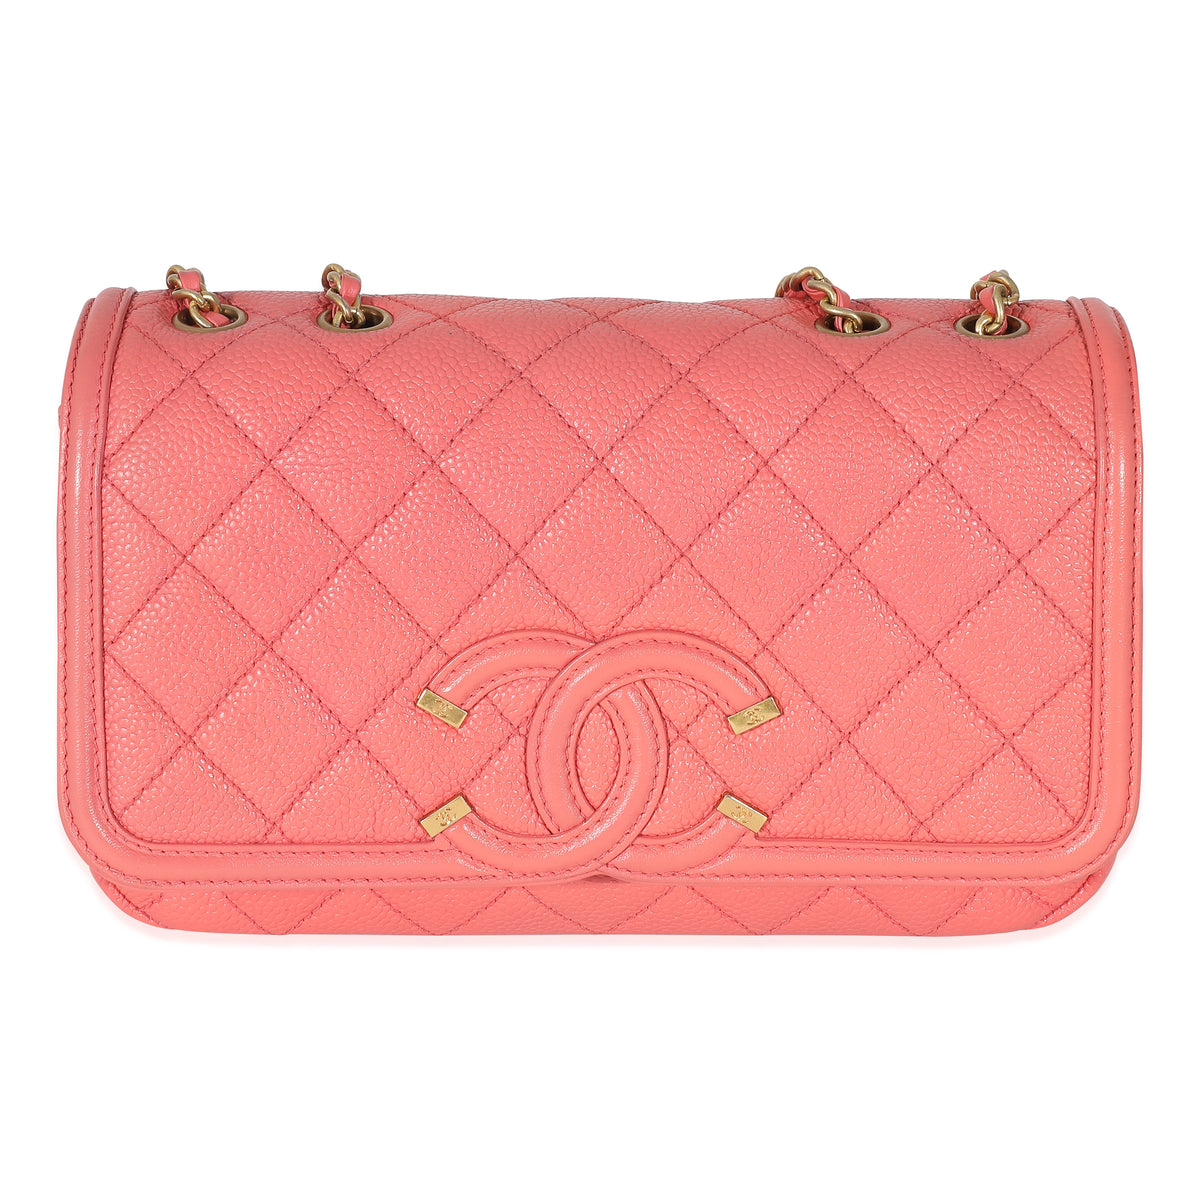 Chanel Pink Quilted Caviar Small Filigree Flap Bag